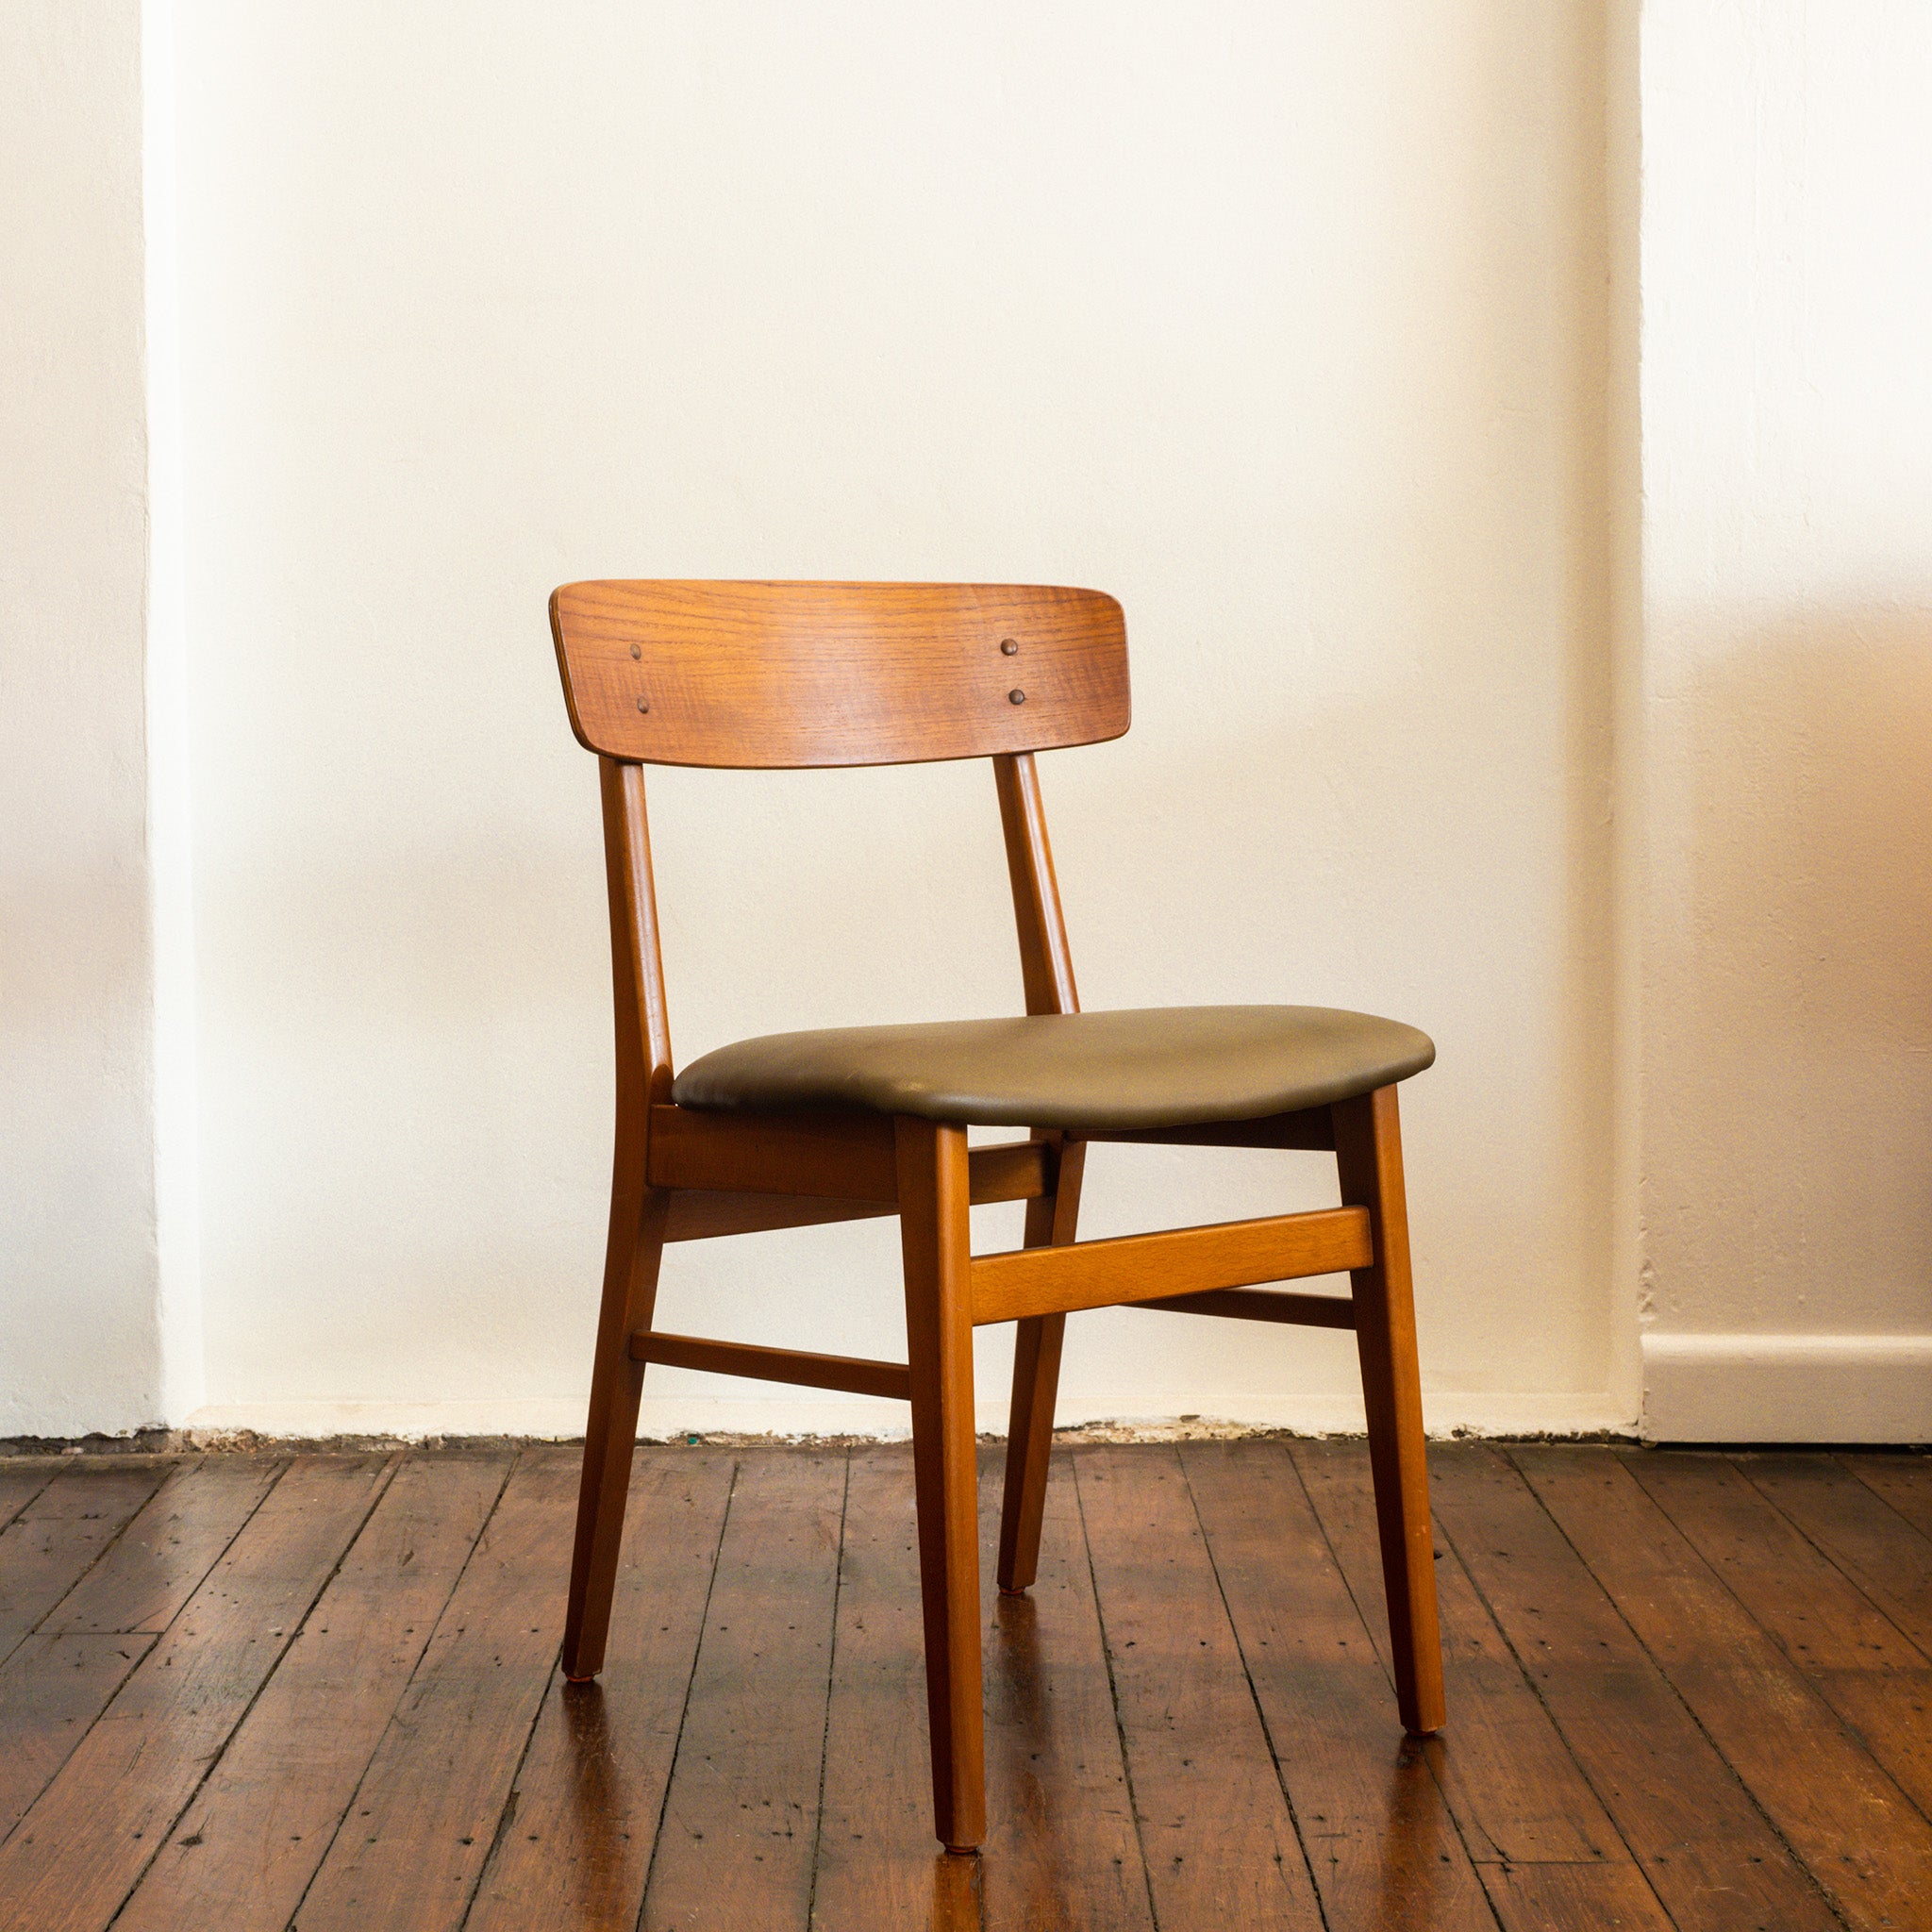 Dining Chair by Farstrup